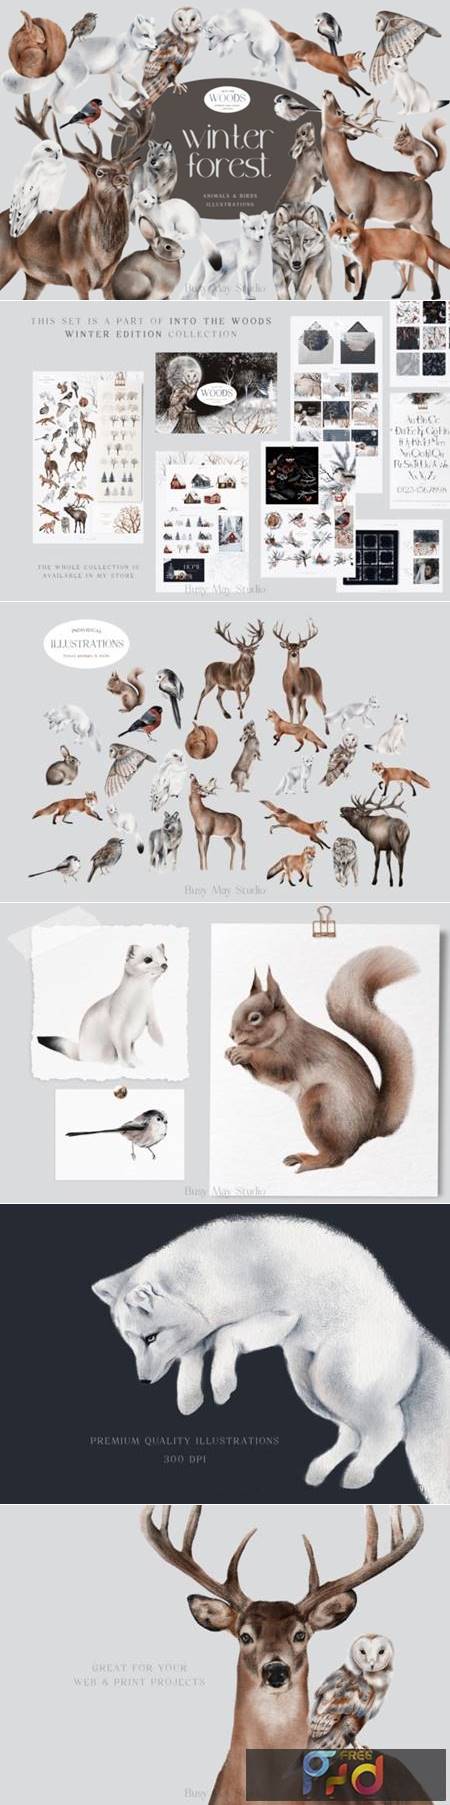 FreePsdVn.com 2111454 STOCK winter forest animals and birds png 18762380